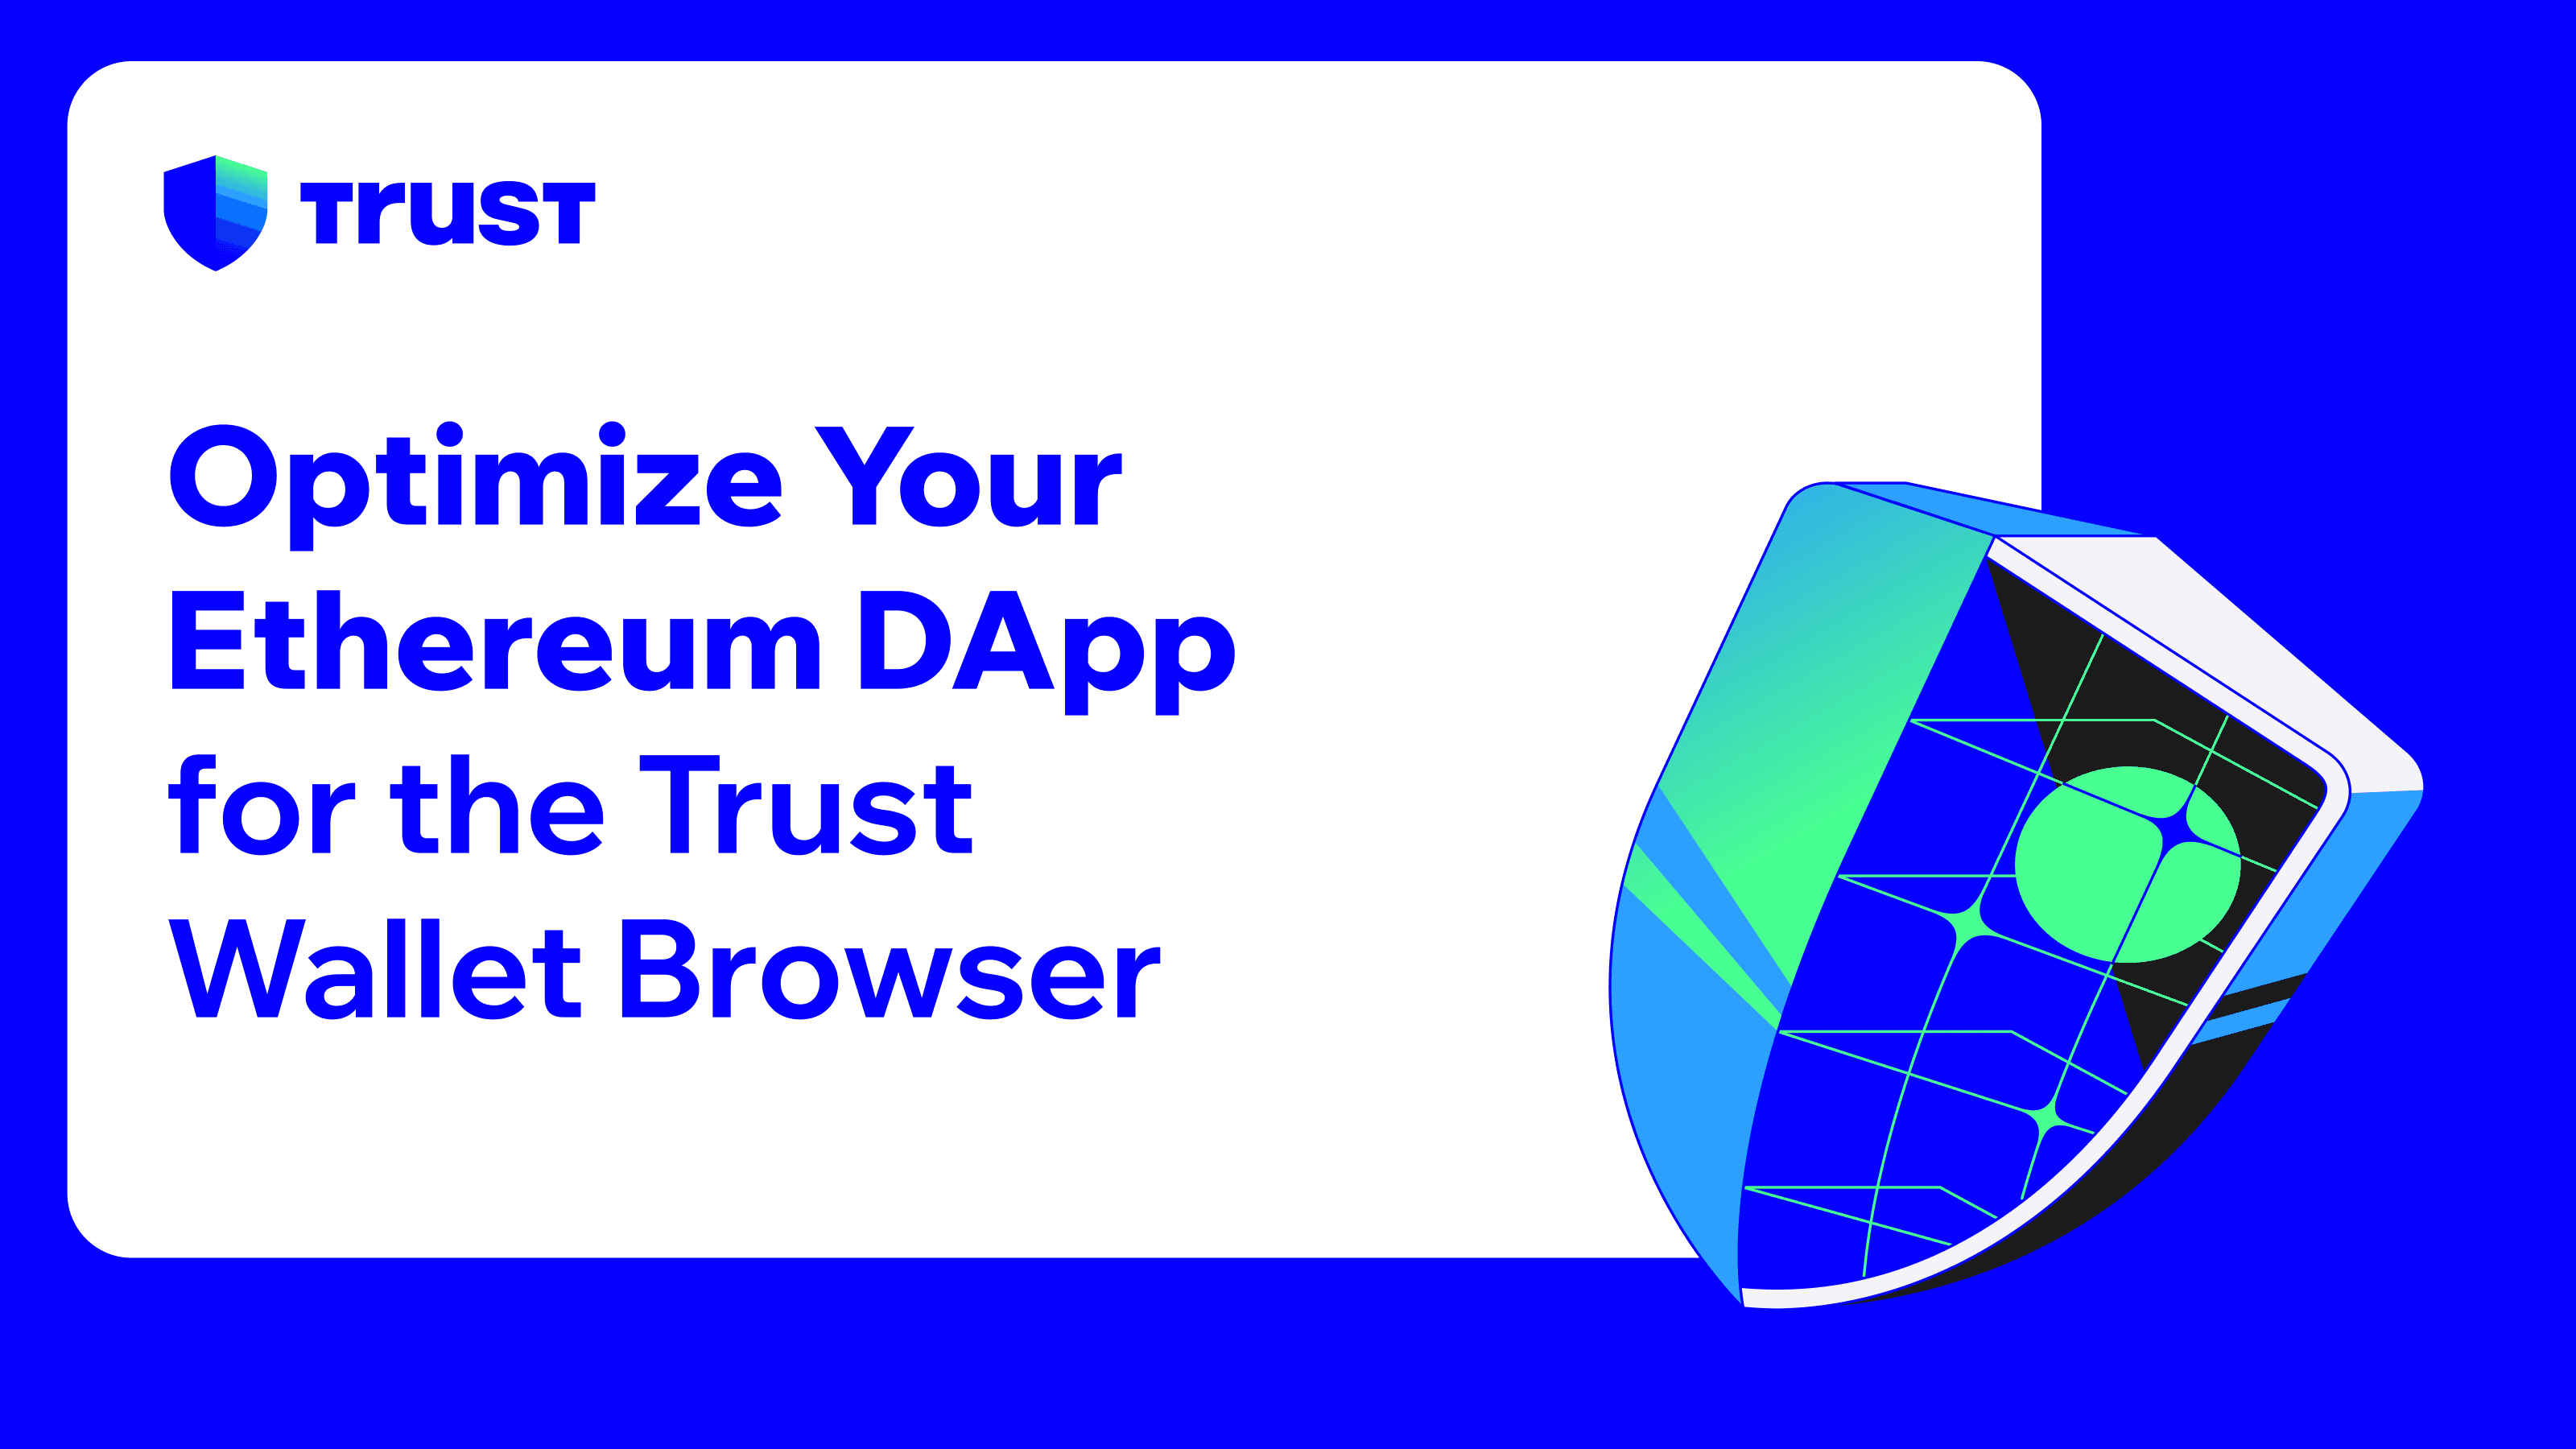 Optimize Your Ethereum DApp for the Trust Wallet Browser